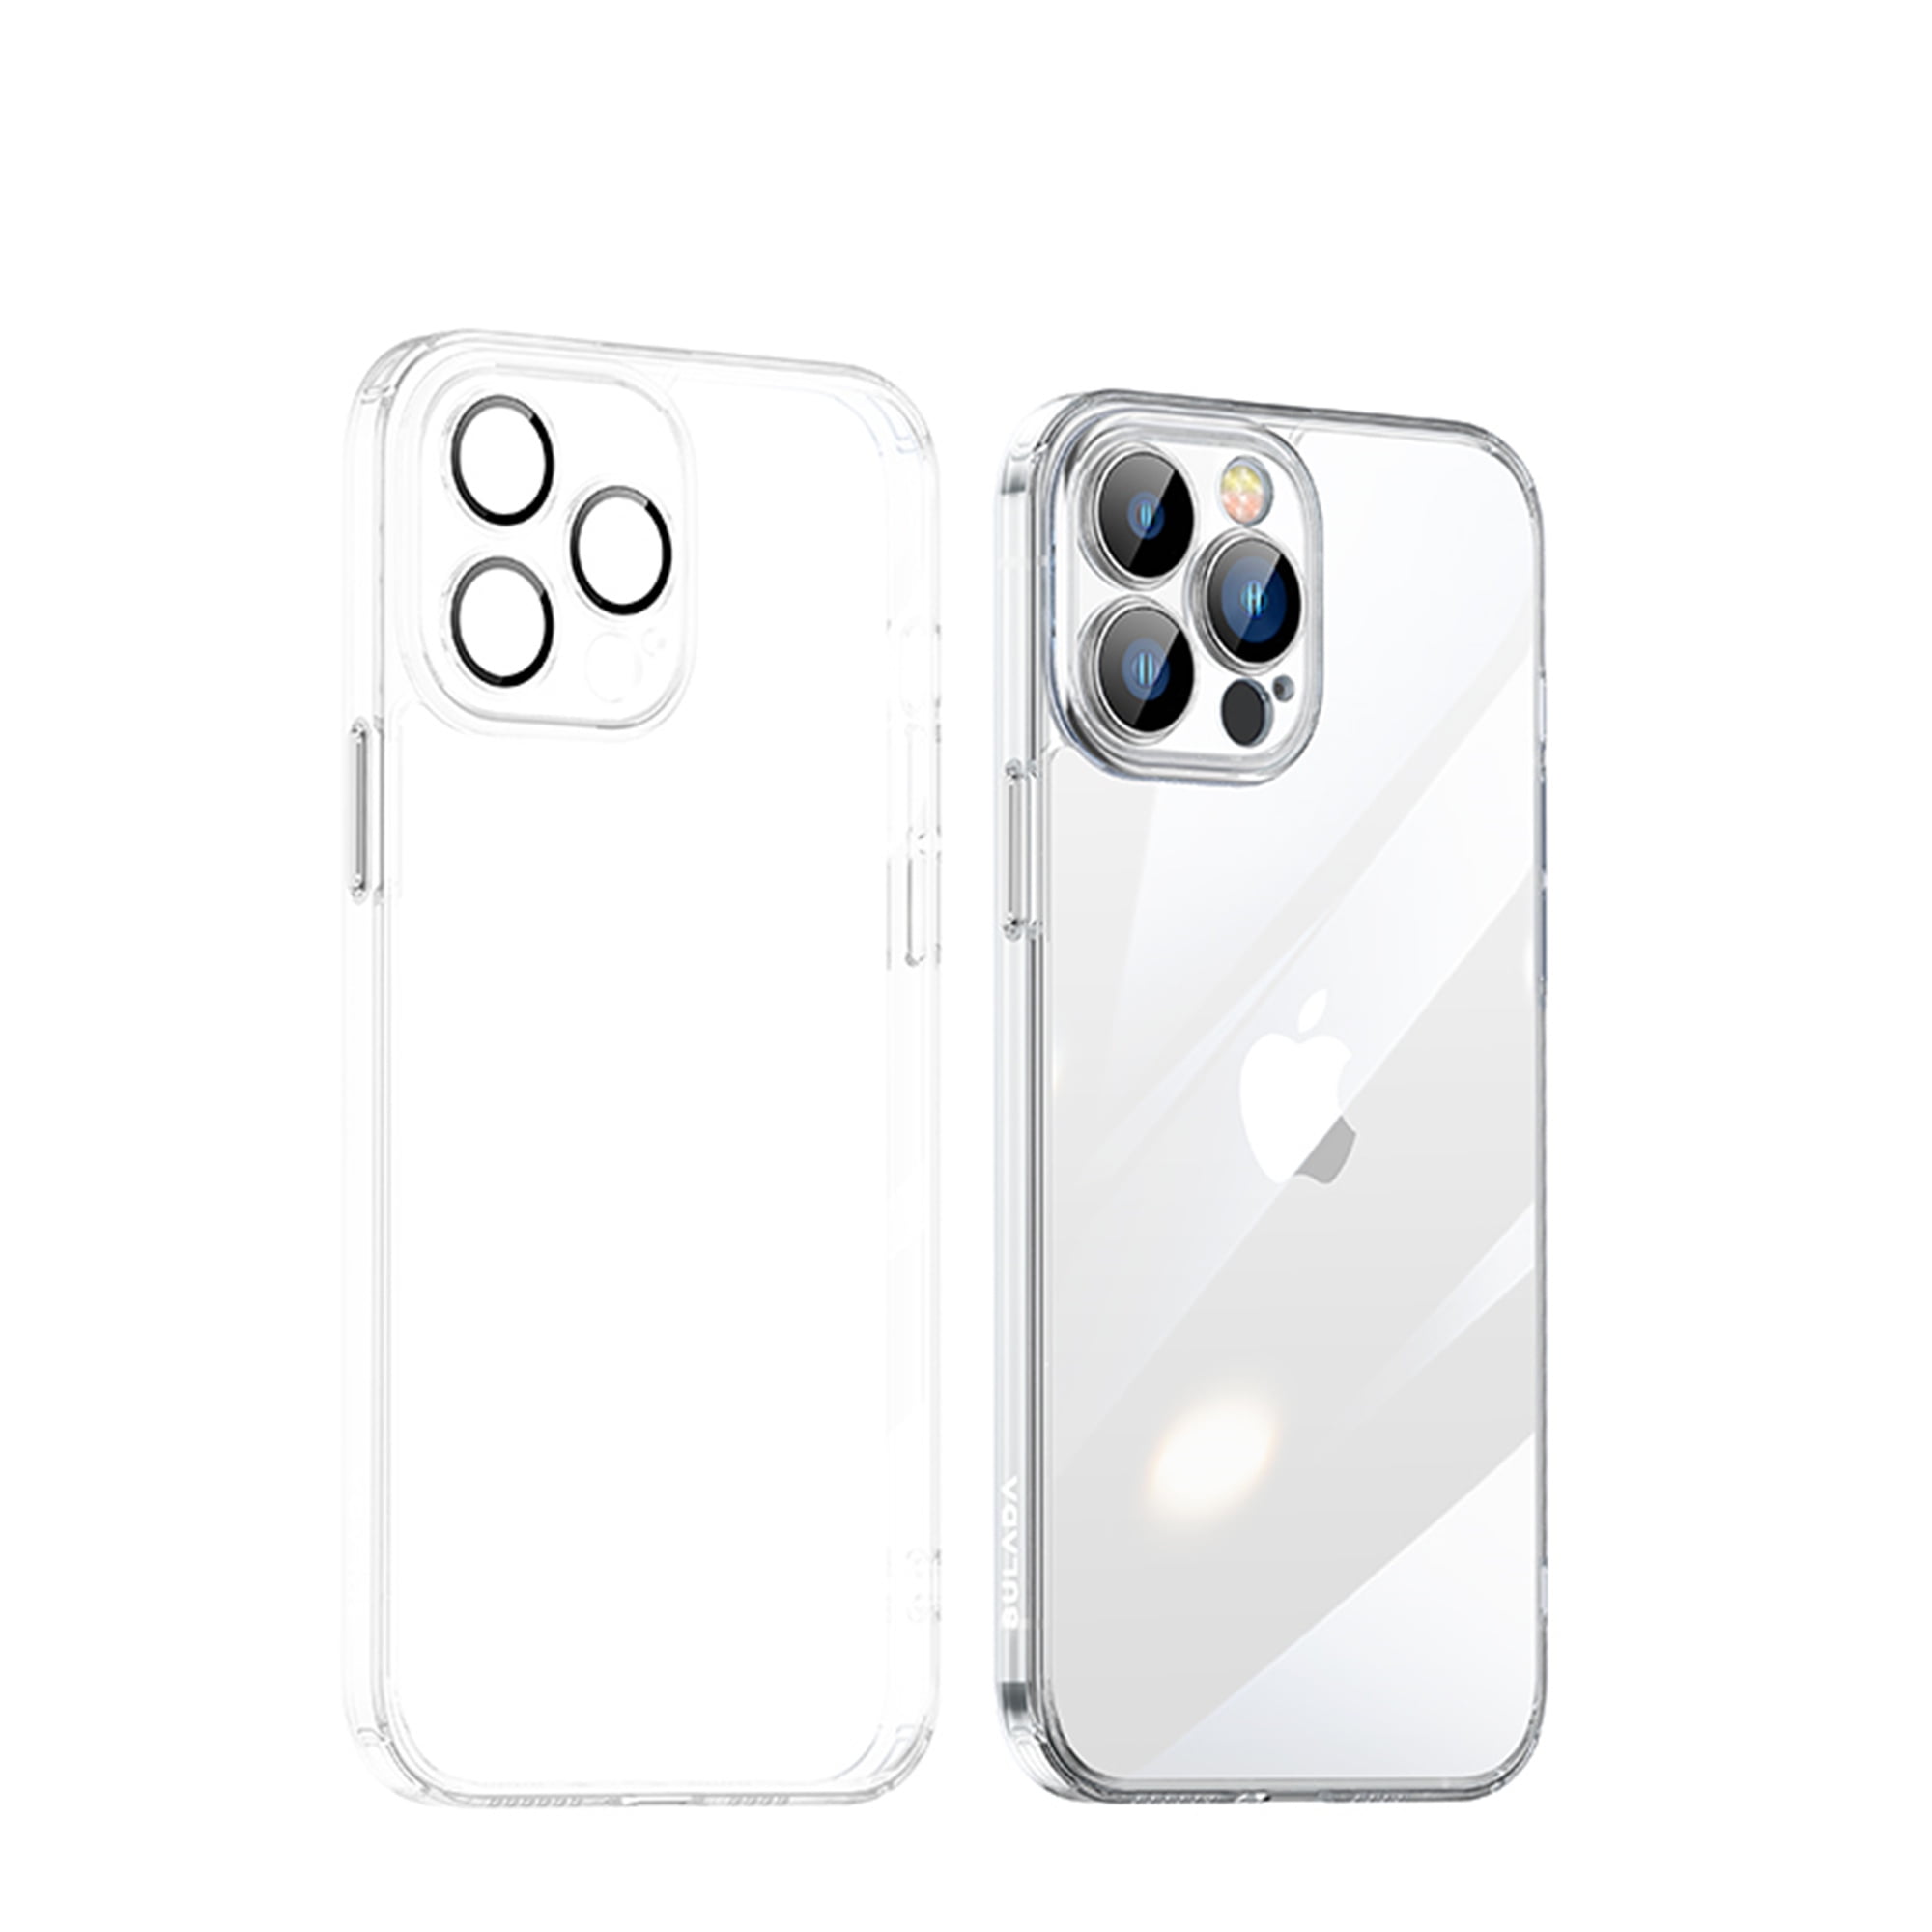 ELEHOLD Hybrid Clear Case for iPhone 15 Pro Max,Transparent Clear Metal  Lens Frame All-inclusive Lens Film Protection Metal Button Slim Shockproof